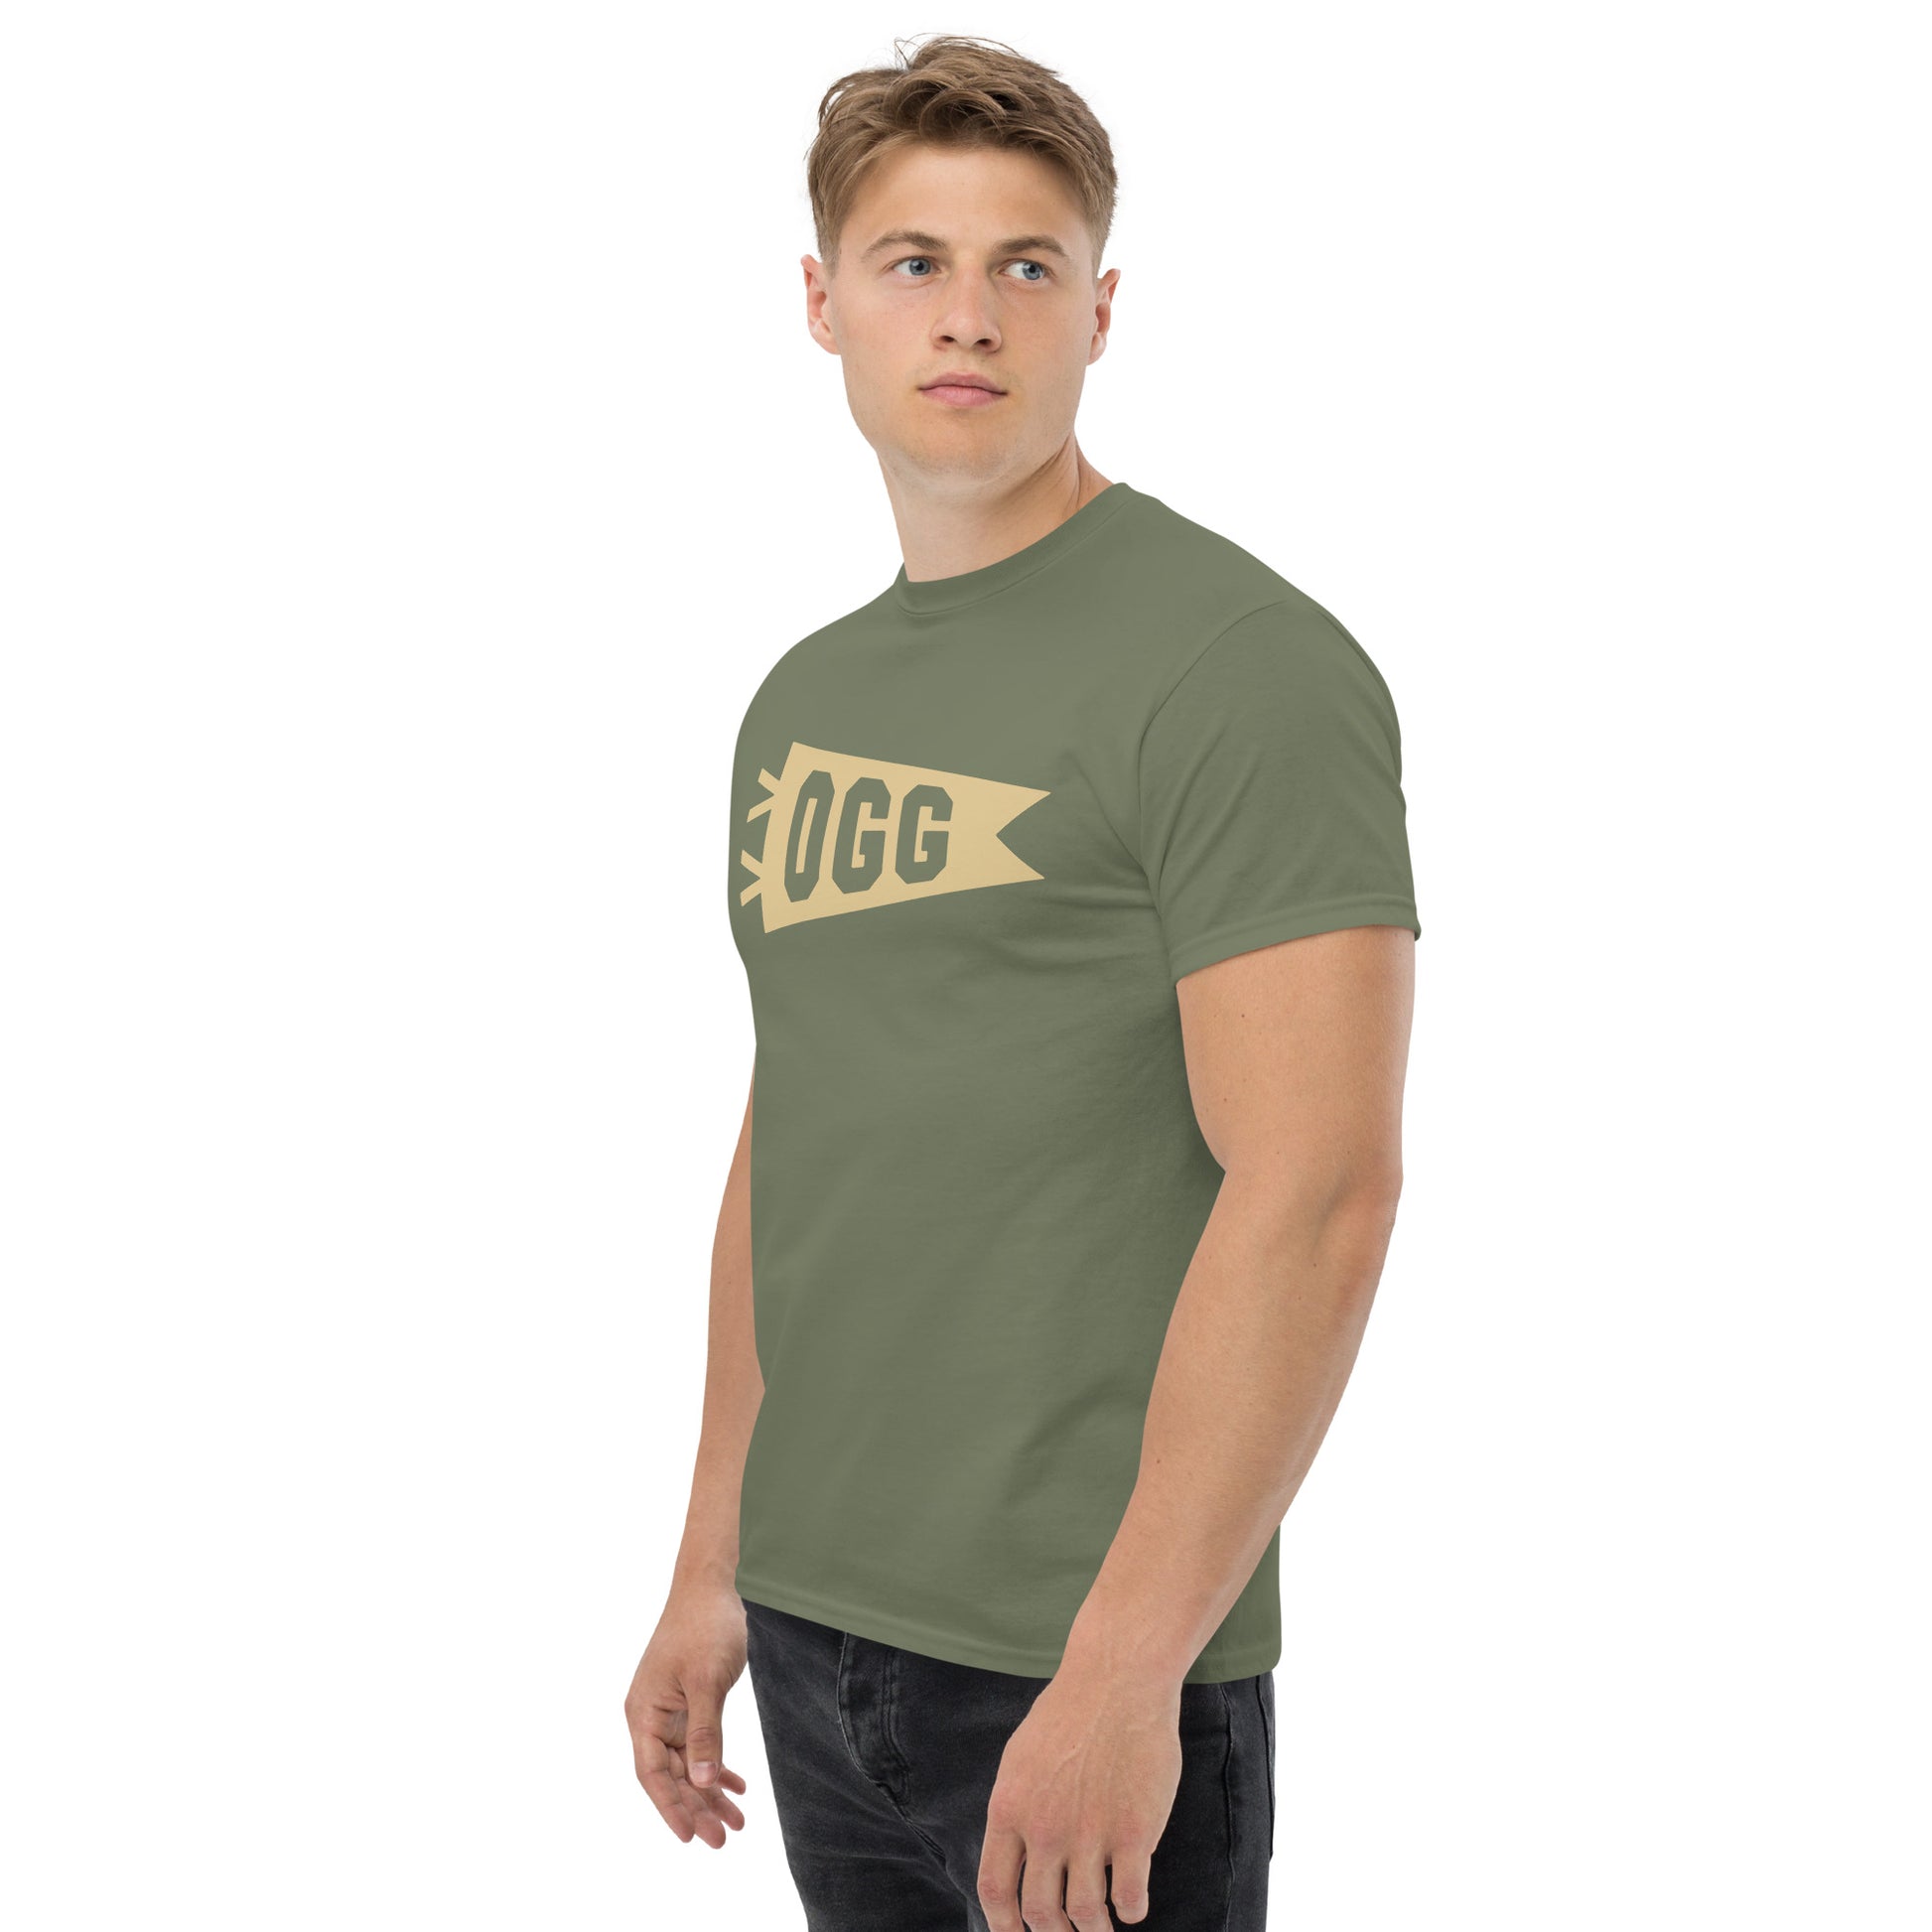 Airport Code Men's T-Shirt - Brown Graphic • OGG Maui • YHM Designs - Image 05